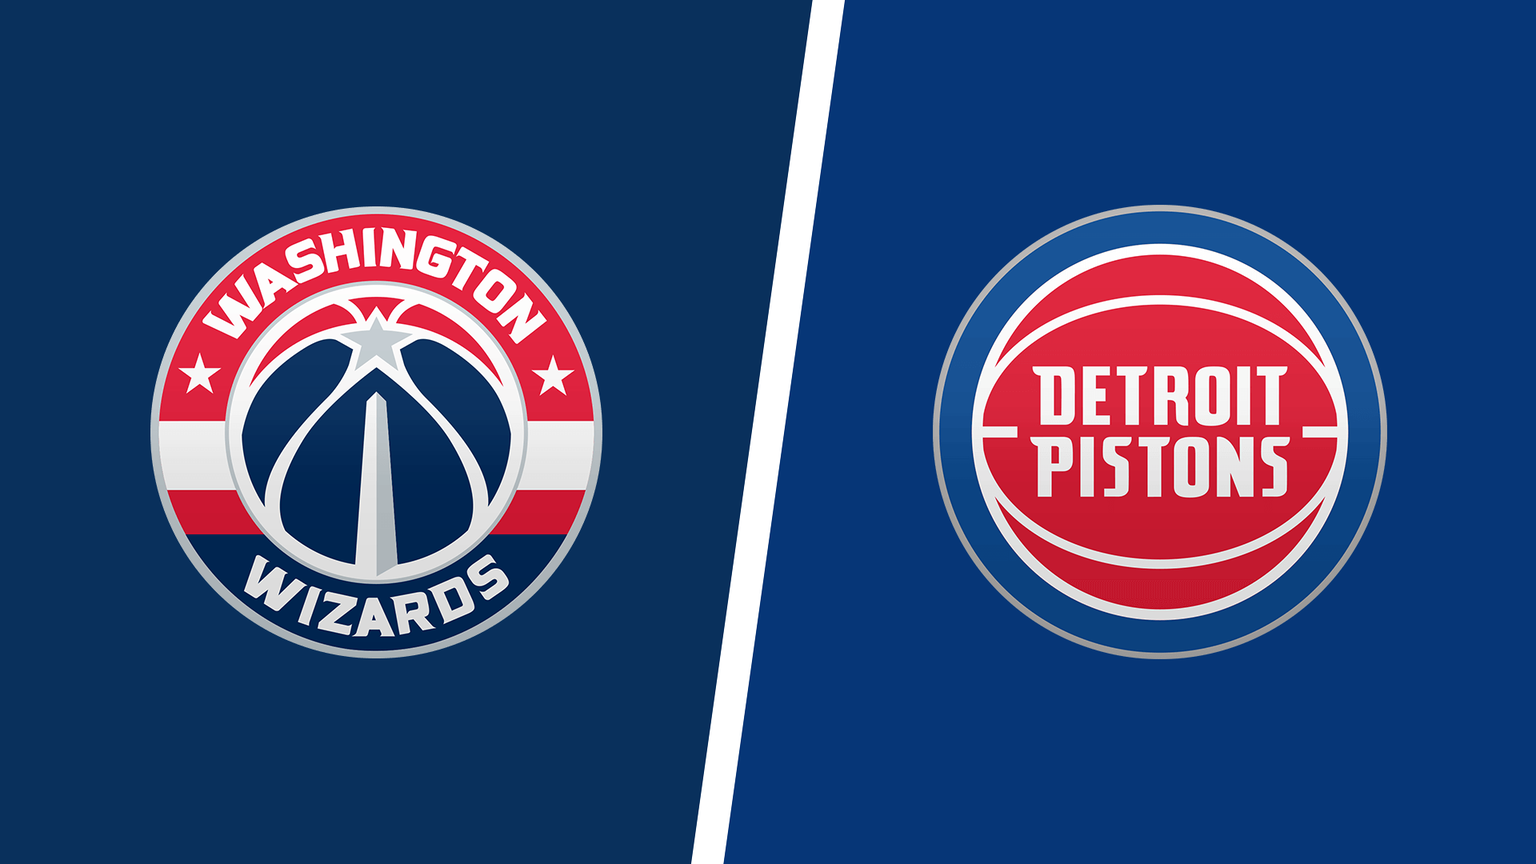 How to Watch Detroit Pistons vs. Washington Wizards Game Live Online on